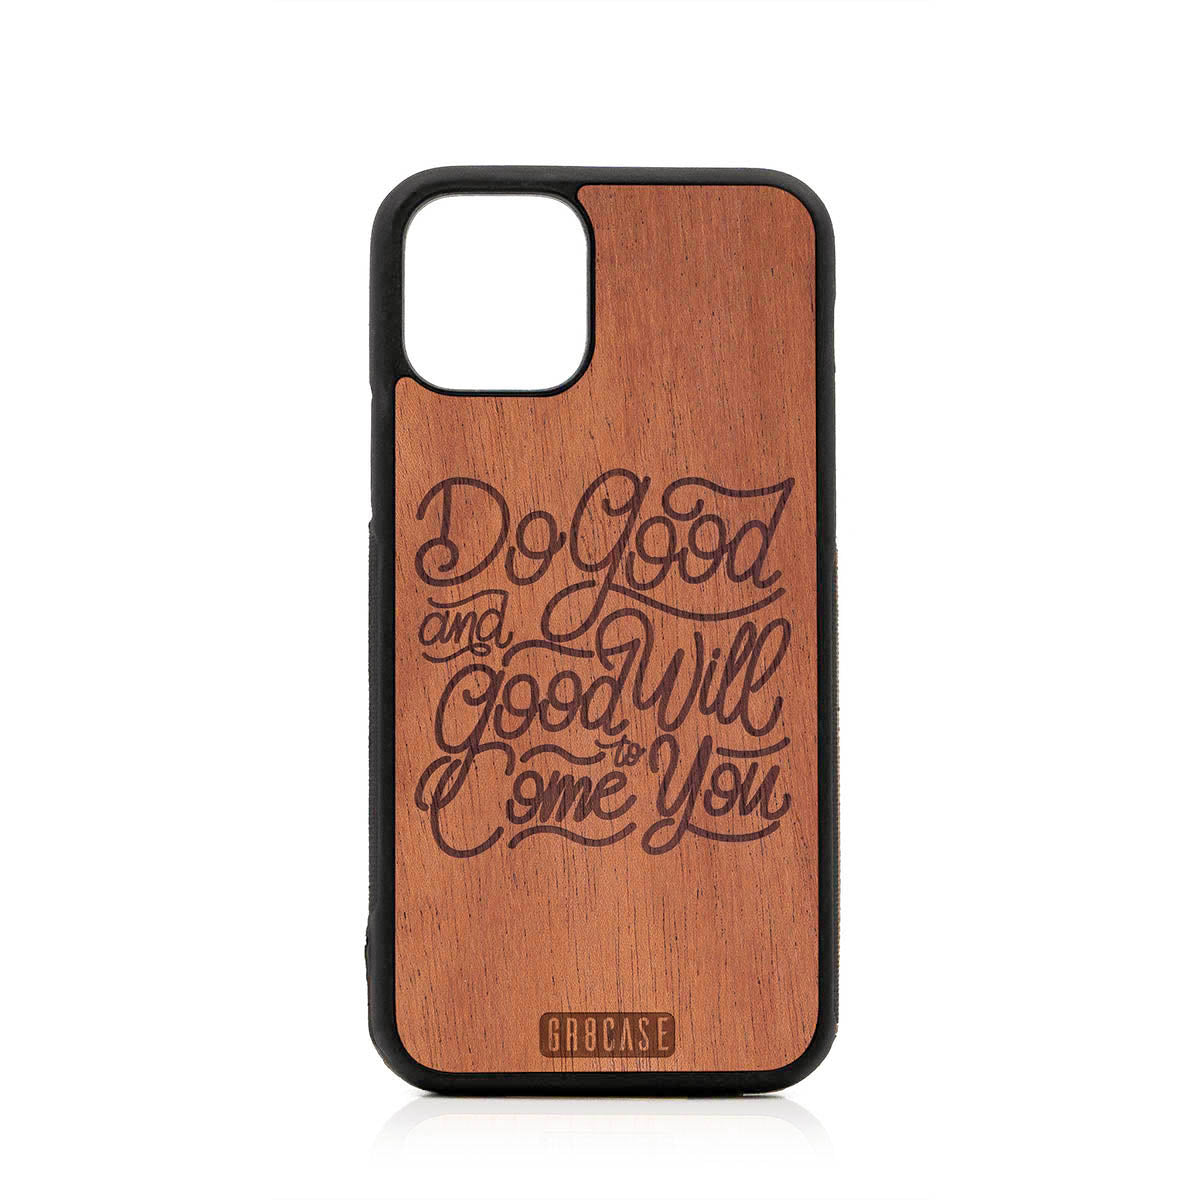 Do Good And Good Will Come To You Design Wood Case For iPhone 11 Pro by GR8CASE